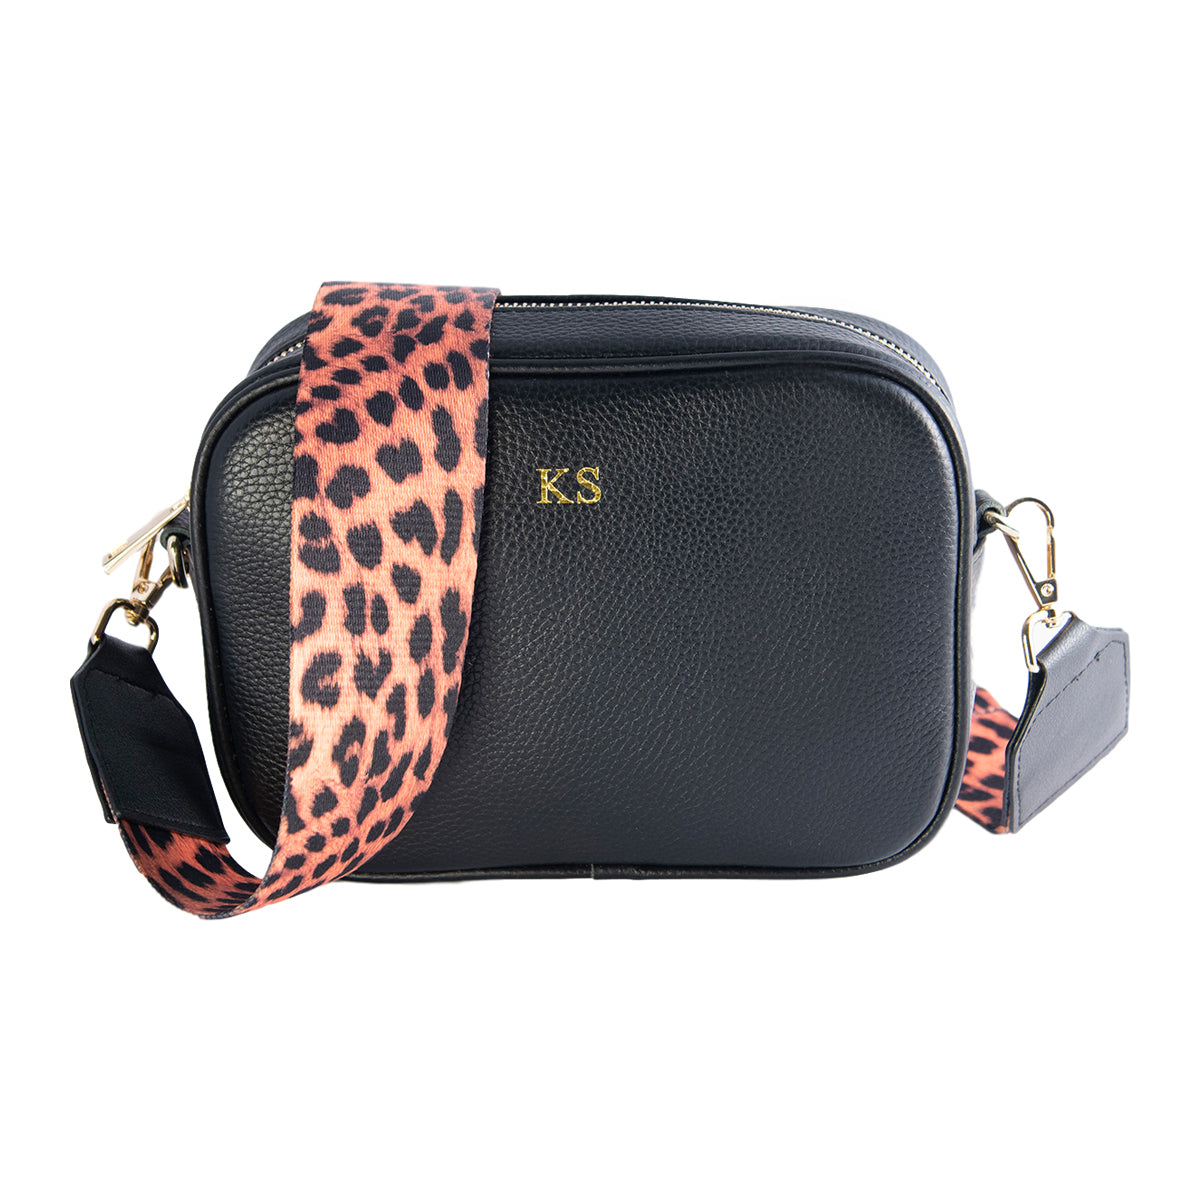 Personalised Black Cross Body Bag with Leopard Print Strap